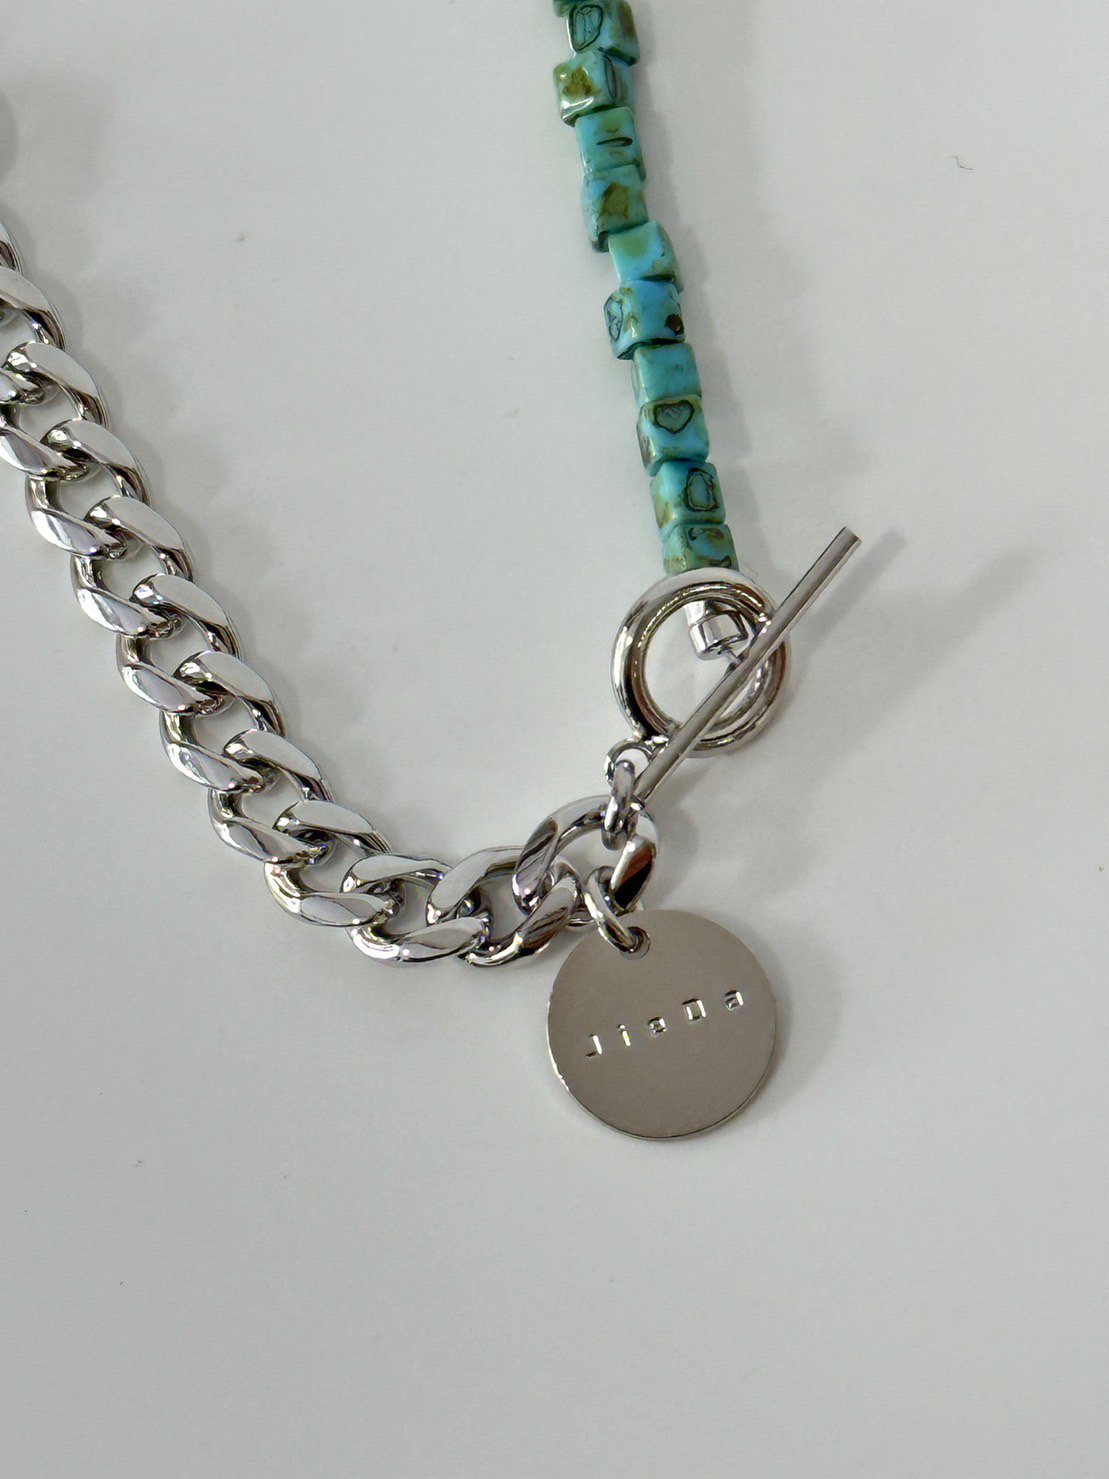 JieDa<br />SWITCHING BEADS NECKLACE / TURQUOISE <img class='new_mark_img2' src='https://img.shop-pro.jp/img/new/icons14.gif' style='border:none;display:inline;margin:0px;padding:0px;width:auto;' />